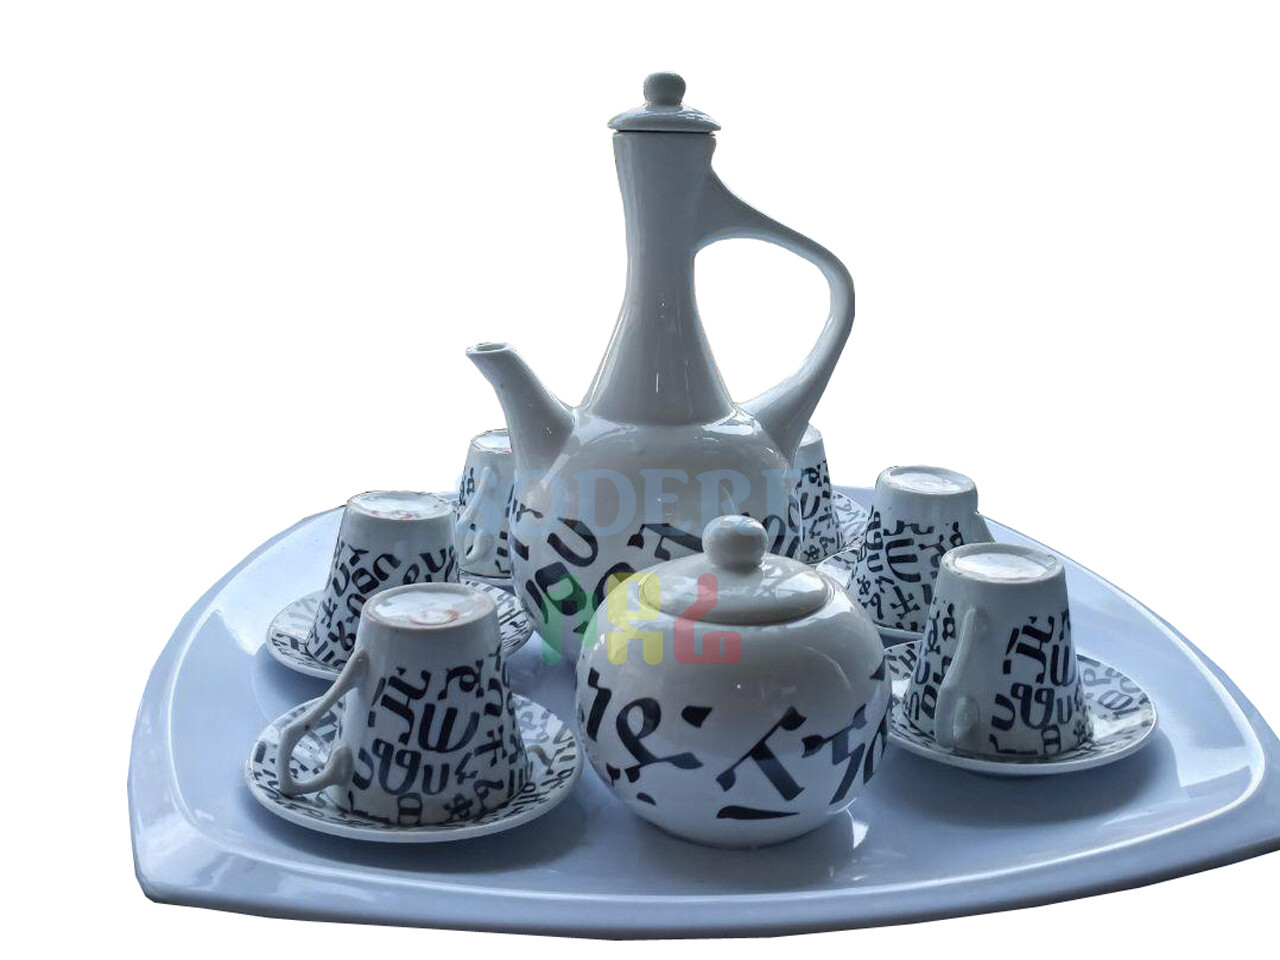 Ethiopian Traditional Coffee Set with Amharic Letters - 6 Cups and 6 Saucers , 1 Coffee Pot and 1 Sugar Bowl 16 PCS